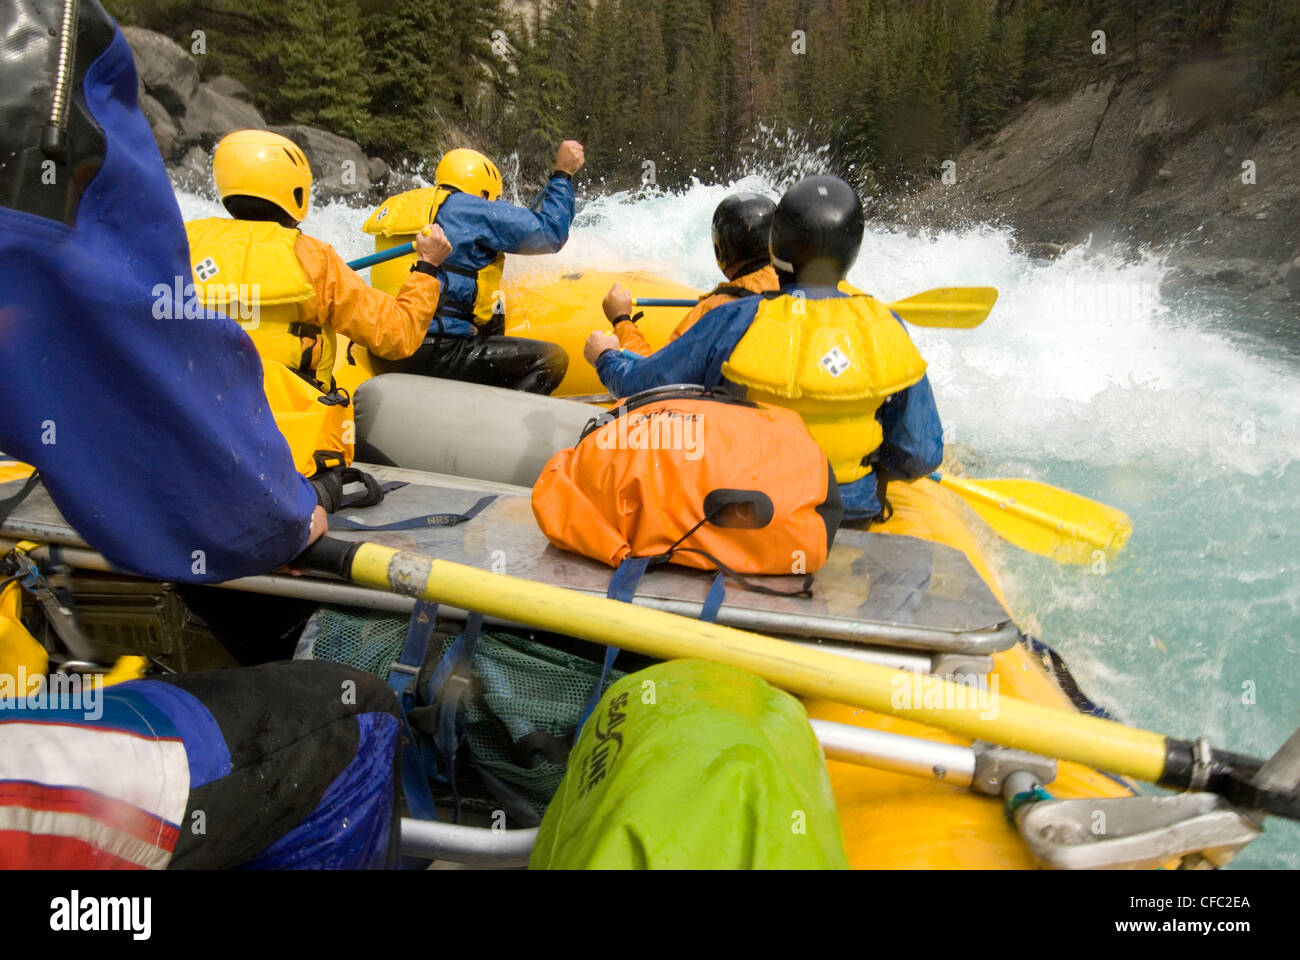 A group of whitewater rafters descend Bidwell's Falls on the Chilko River, British Columbia, Canada Stock Photo